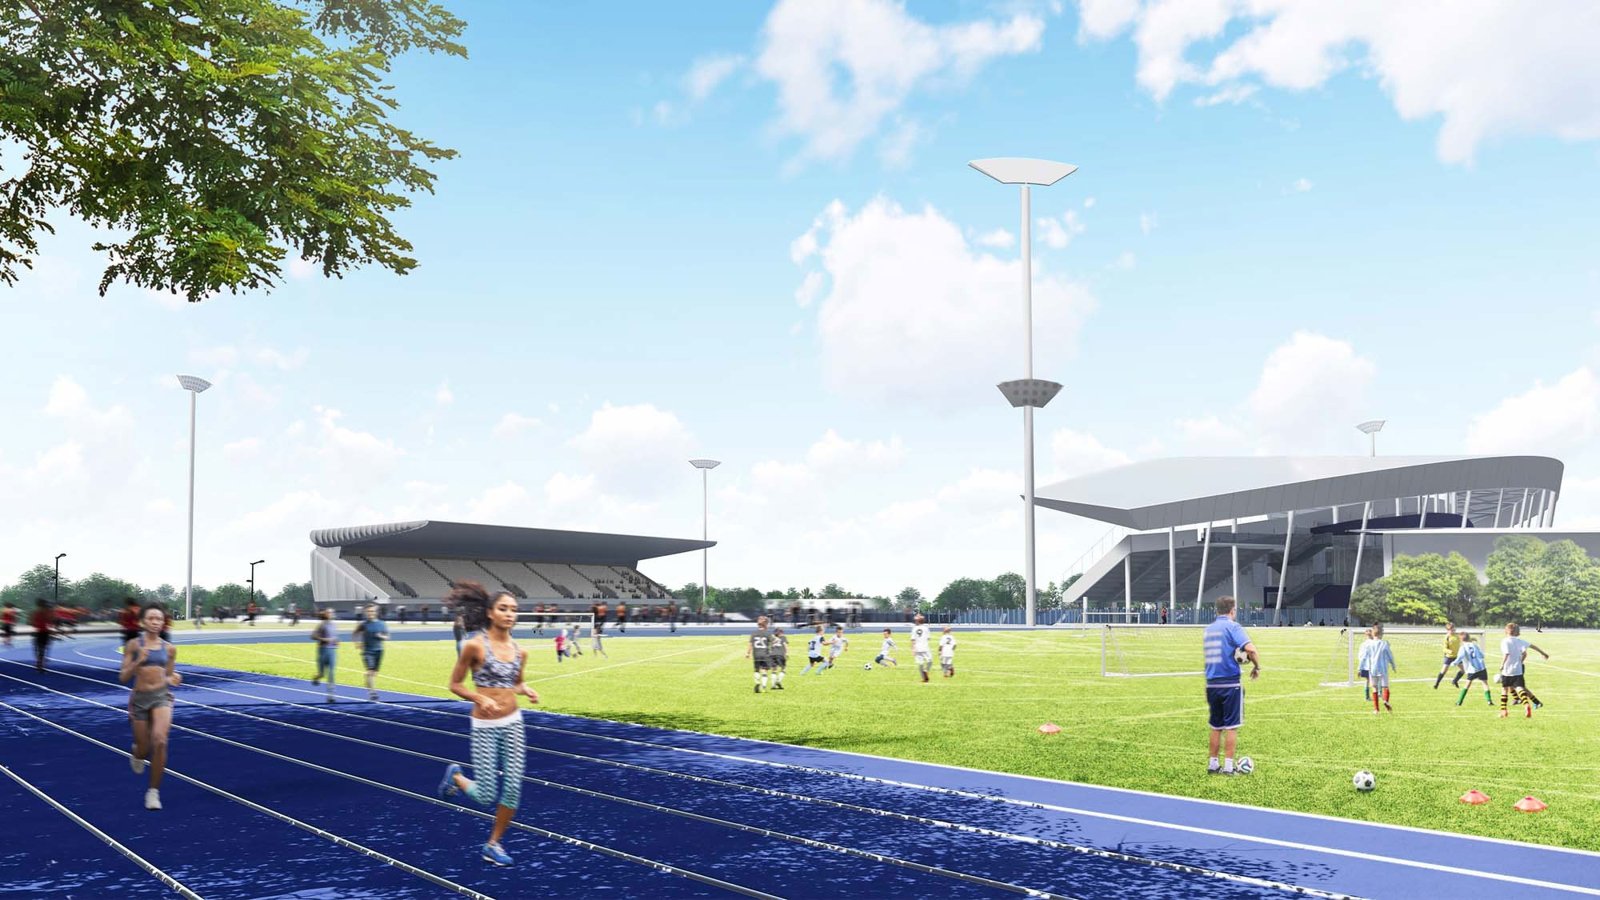 Impression of the stadium being used by athletes